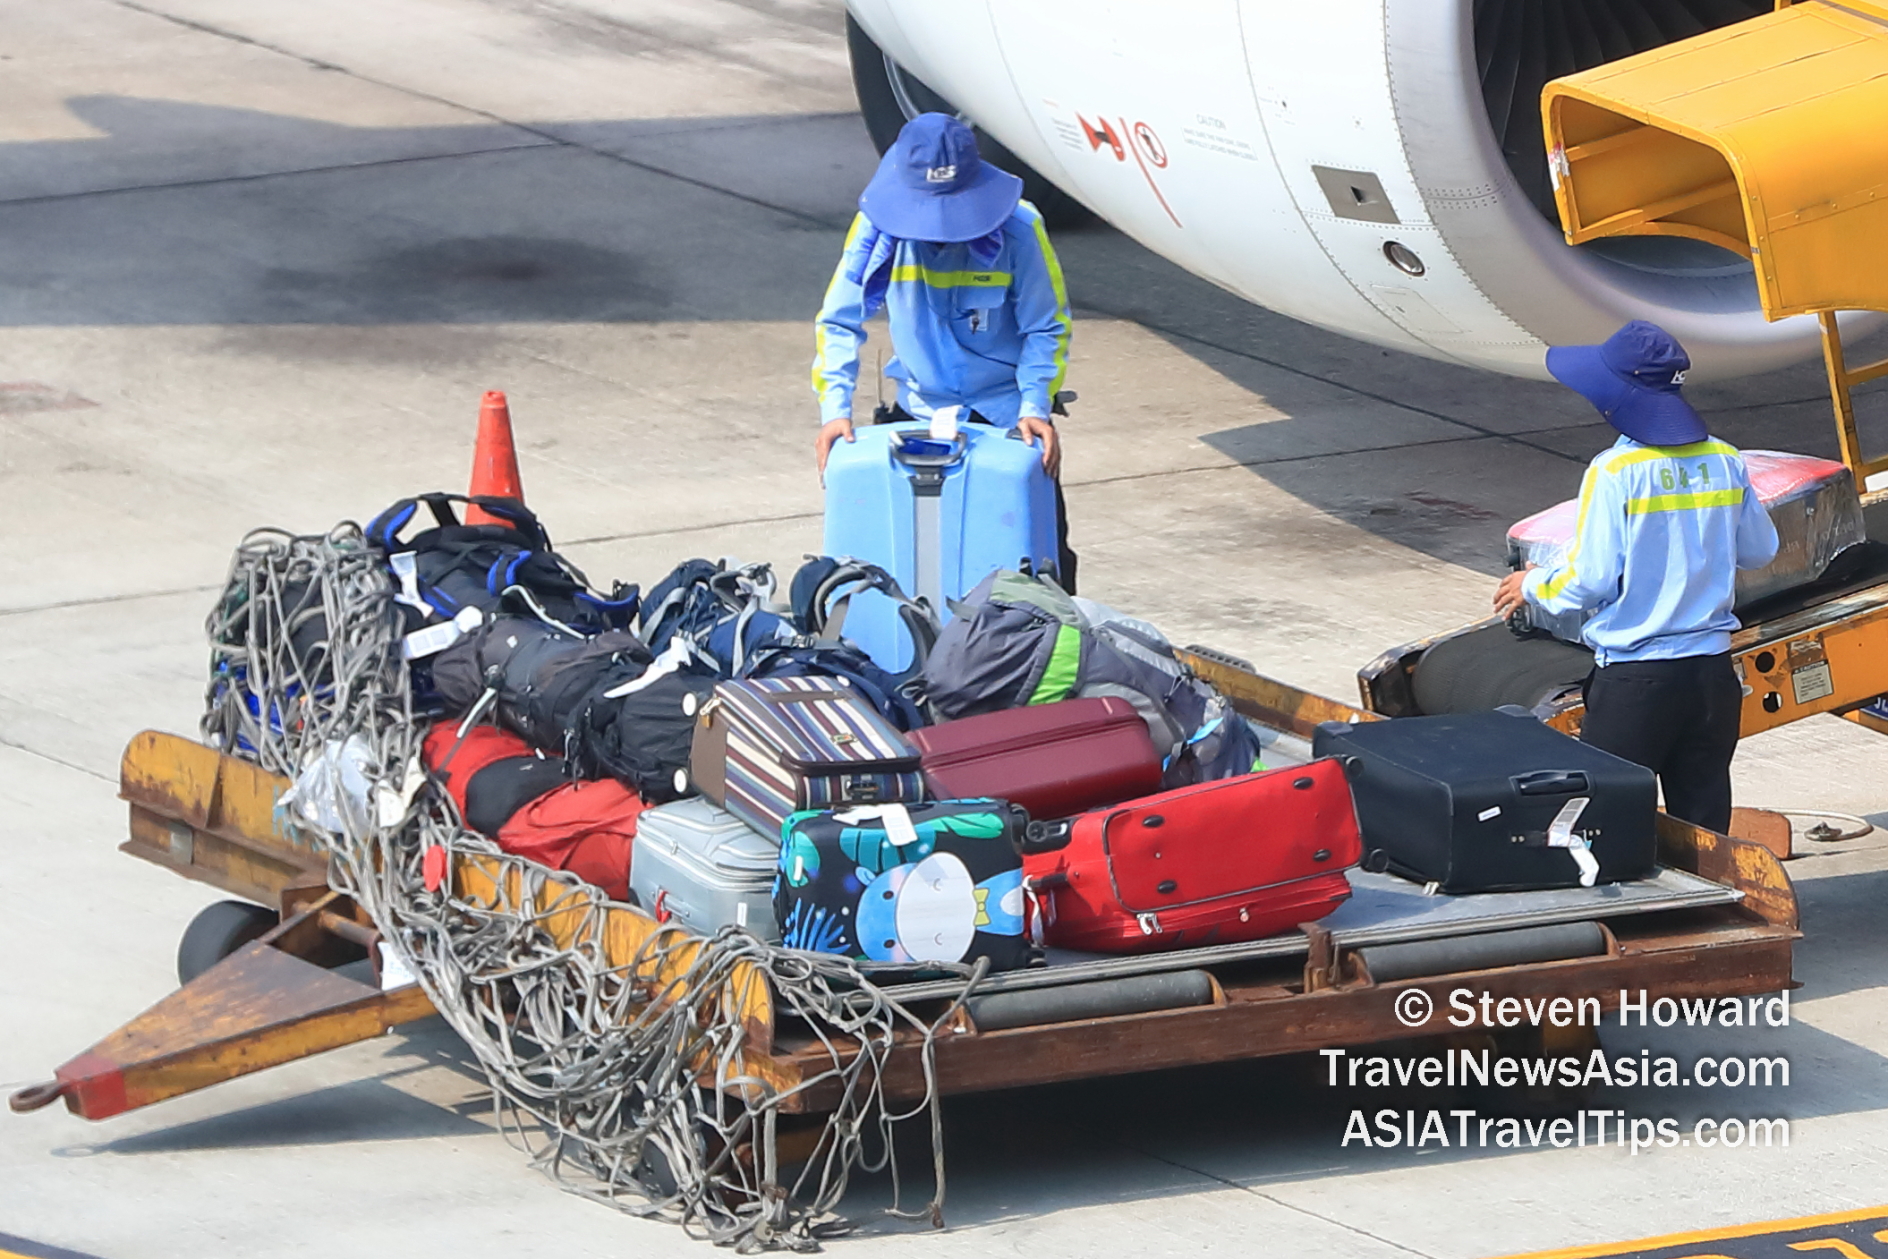 Baggage being loaded onto a plane. Picture by Steven Howard of TravelNewsAsia.com Click to enlarge.